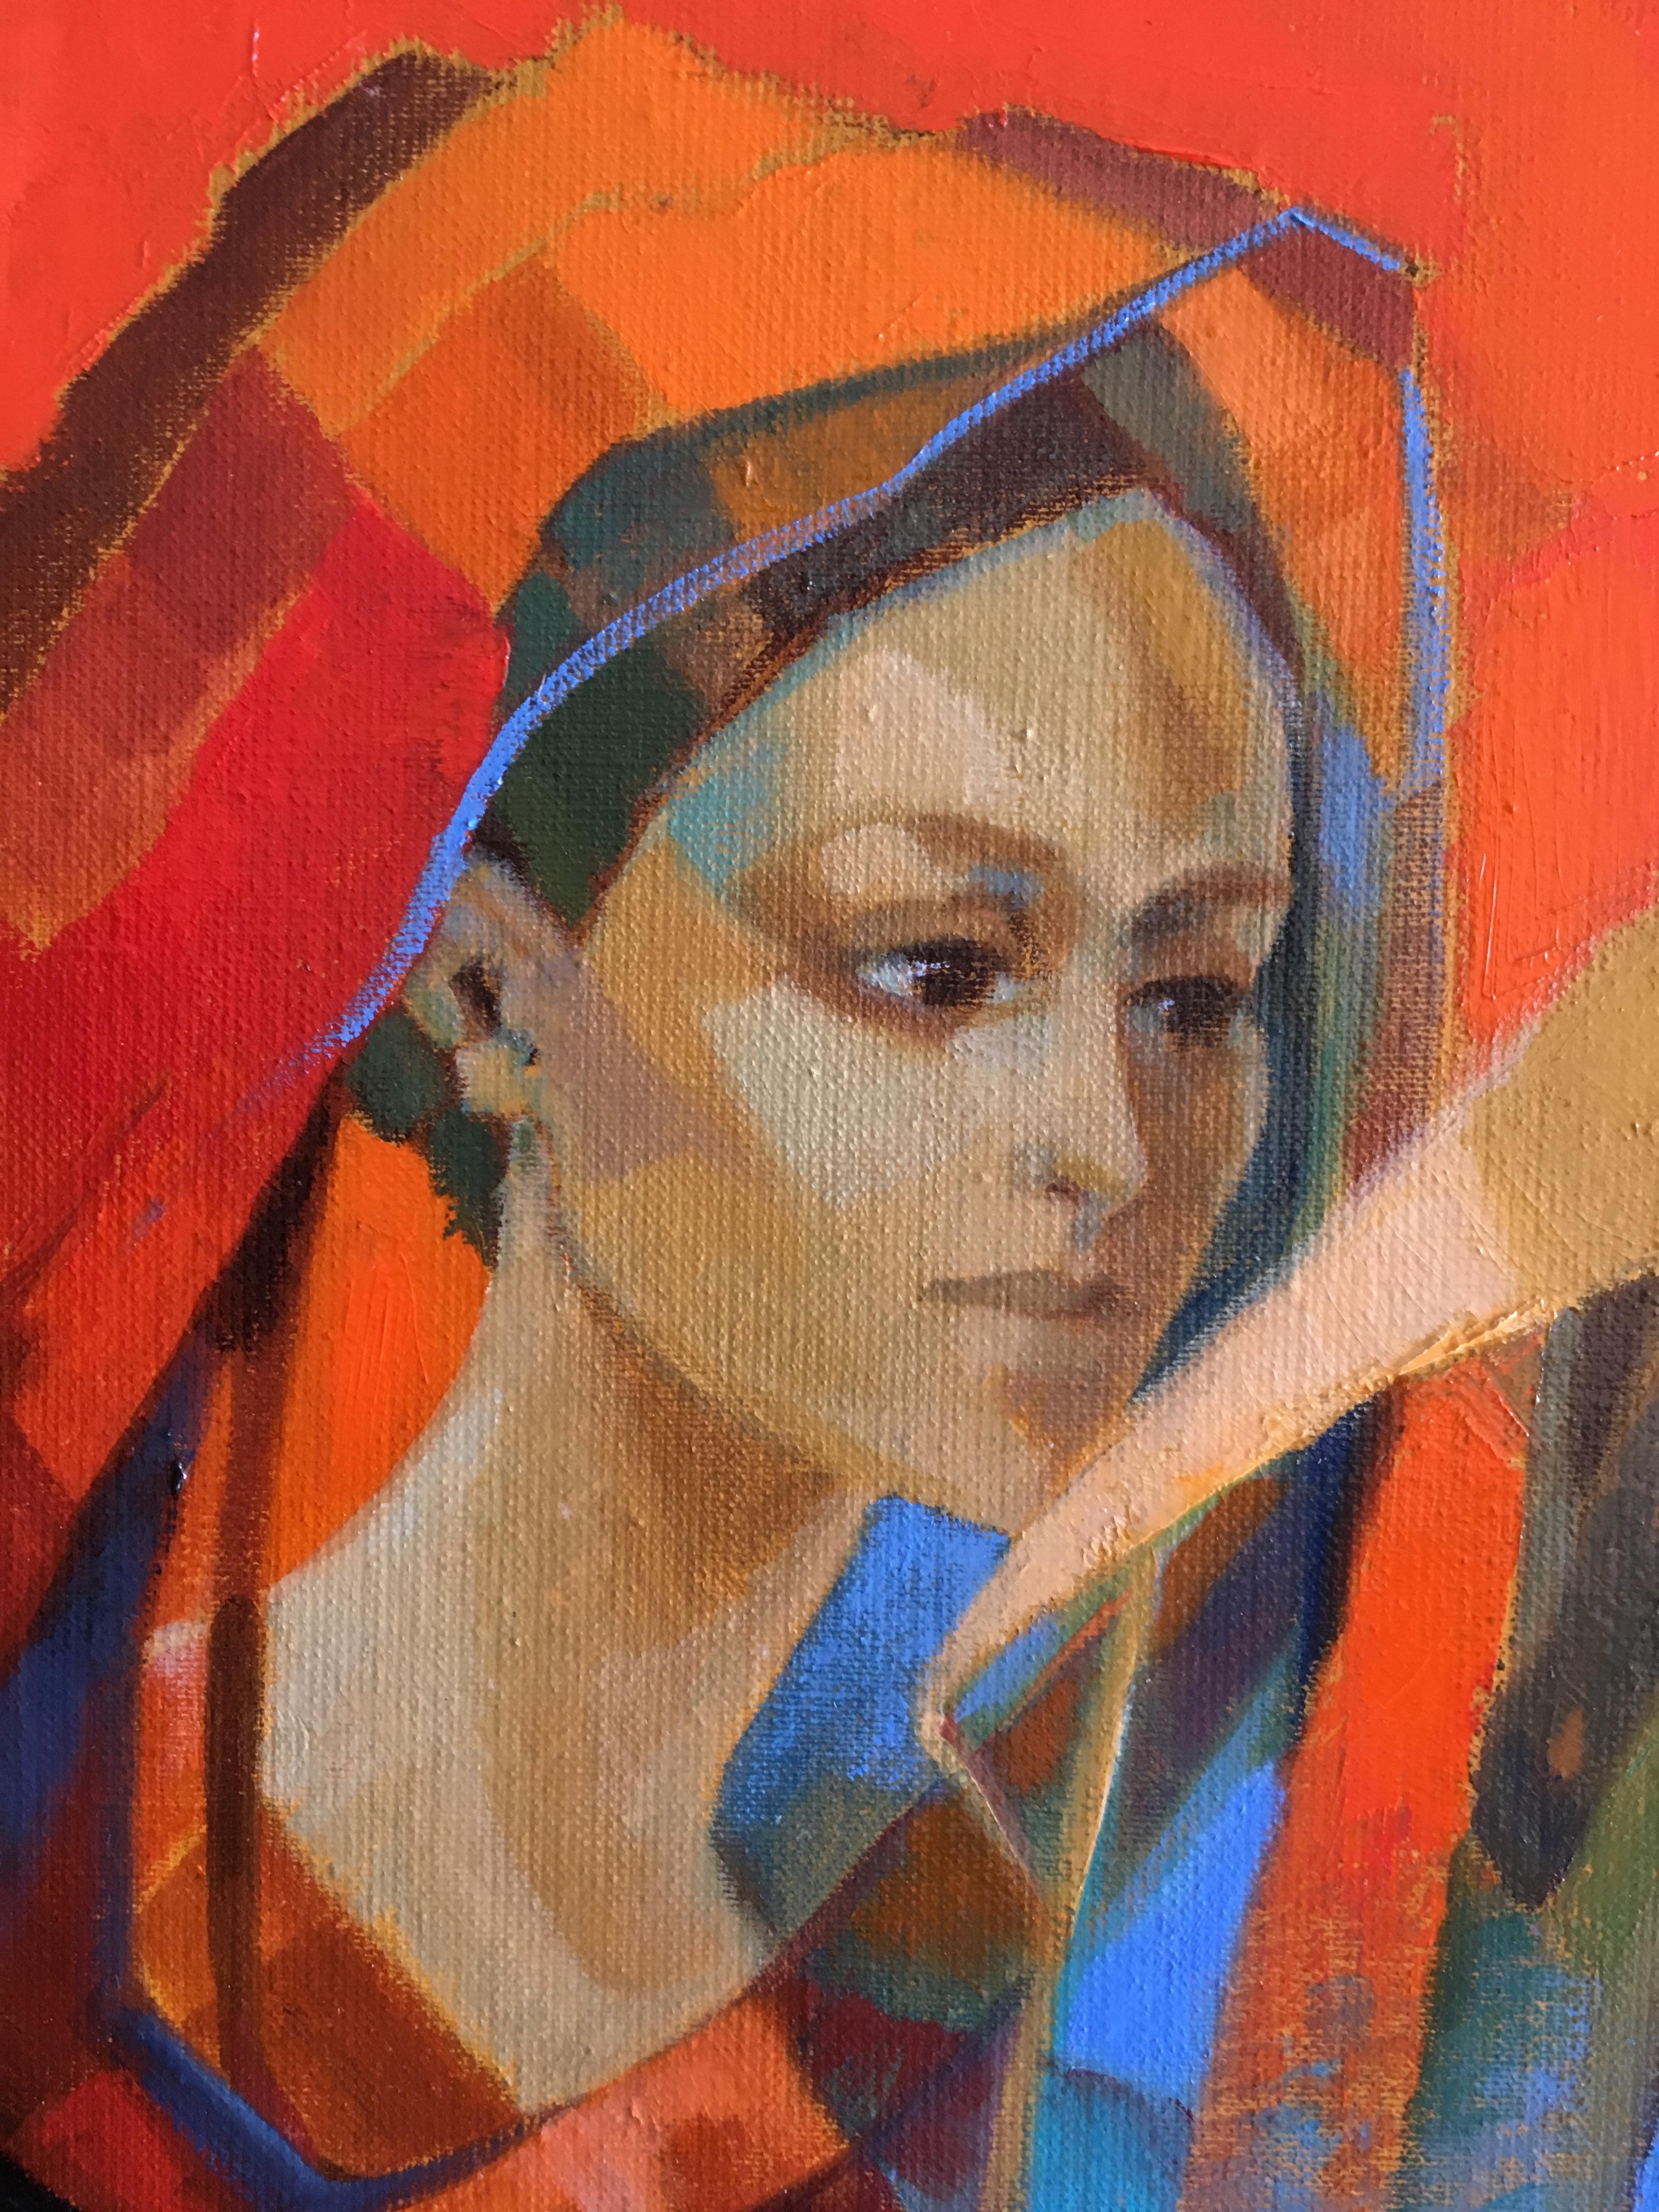 The procession, Oil on canvas Expressionist Style Red Orange and Blue colors - Painting by Jori Duran